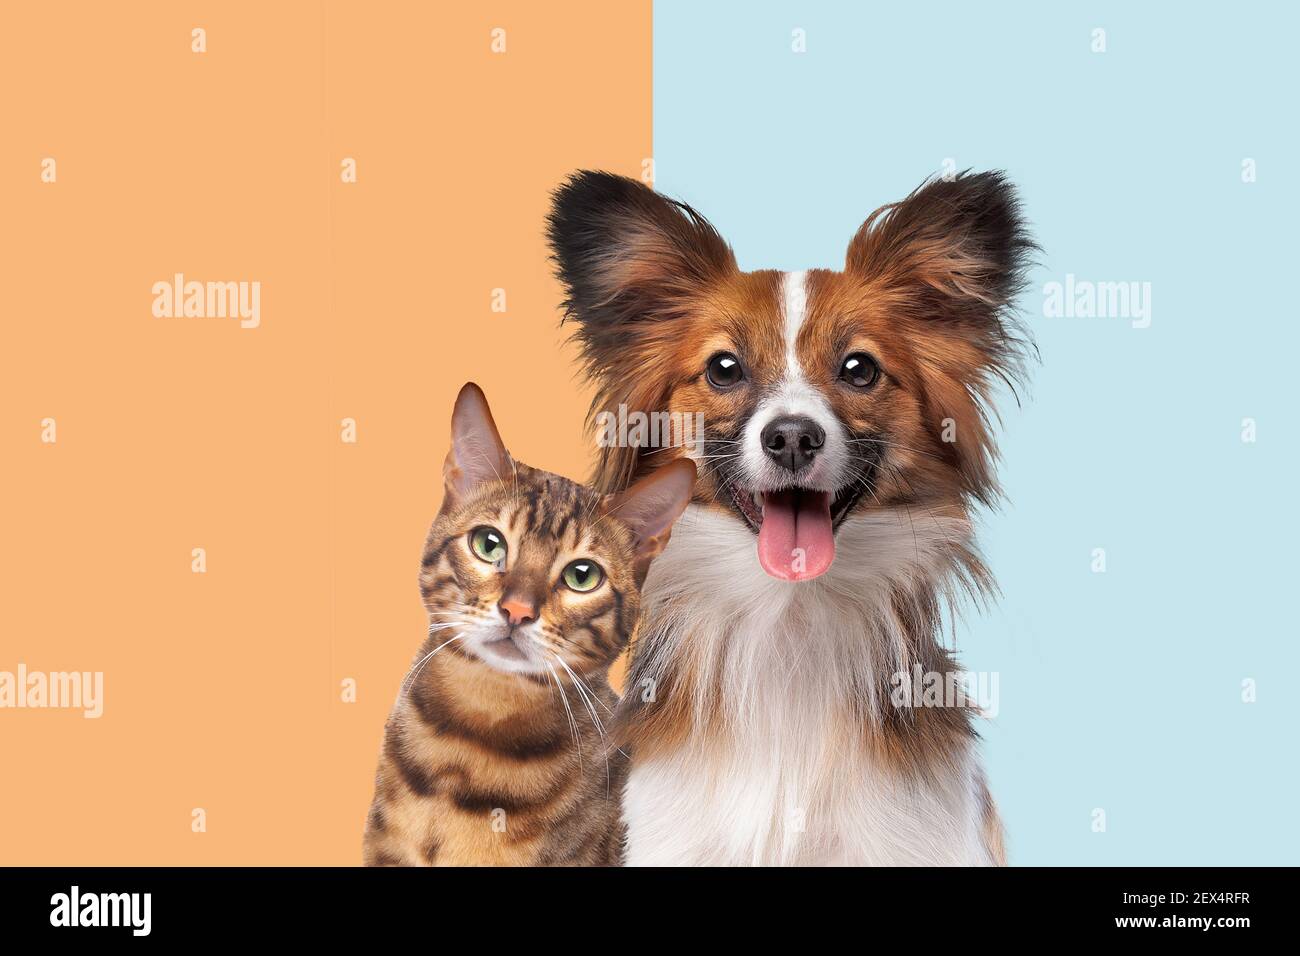 portrait of a cat and dog looking at camera in front of trendy duo tone background Stock Photo